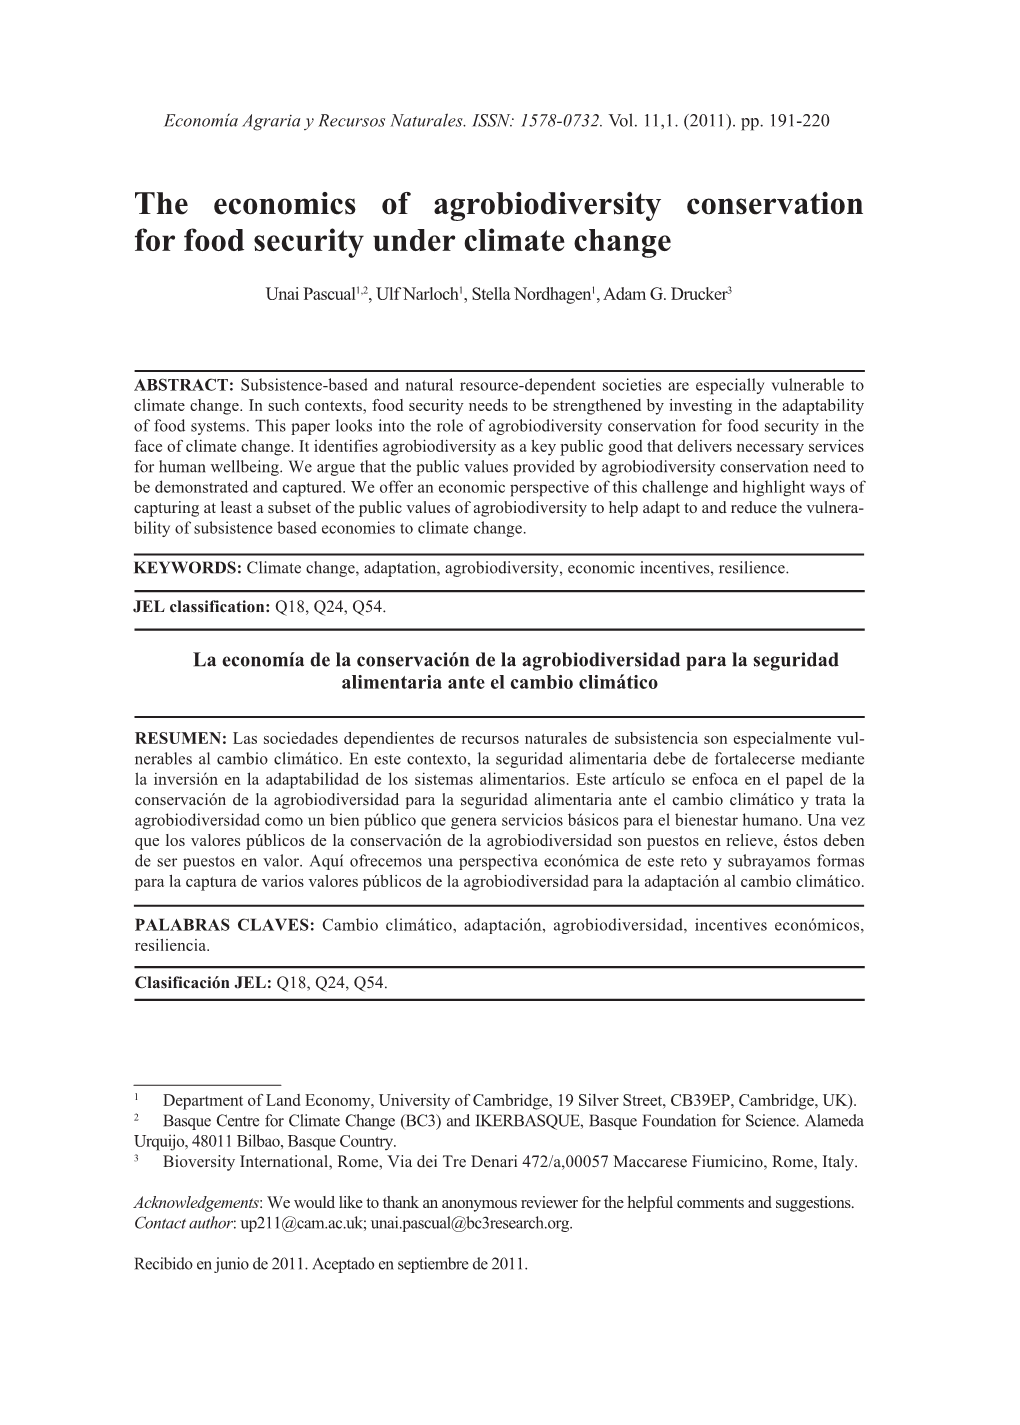 The Economics of Agrobiodiversity Conservation for Food Security Under Climate Change